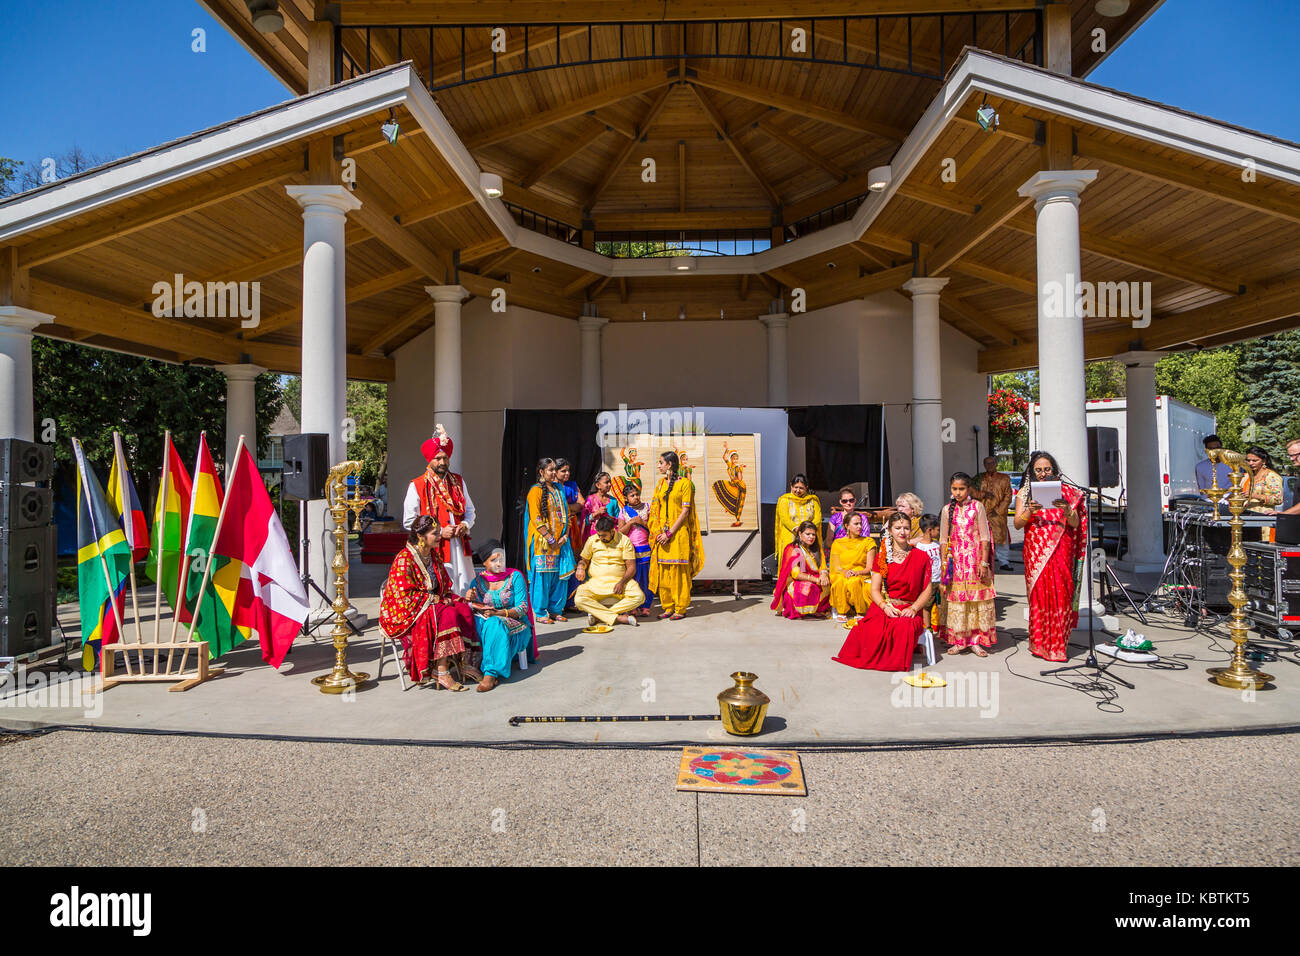 A re-enactment of a colorful Indian Wedding ceremony held at Culture Fest 2017 in Winkler, Manitoba, Canada. Stock Photo